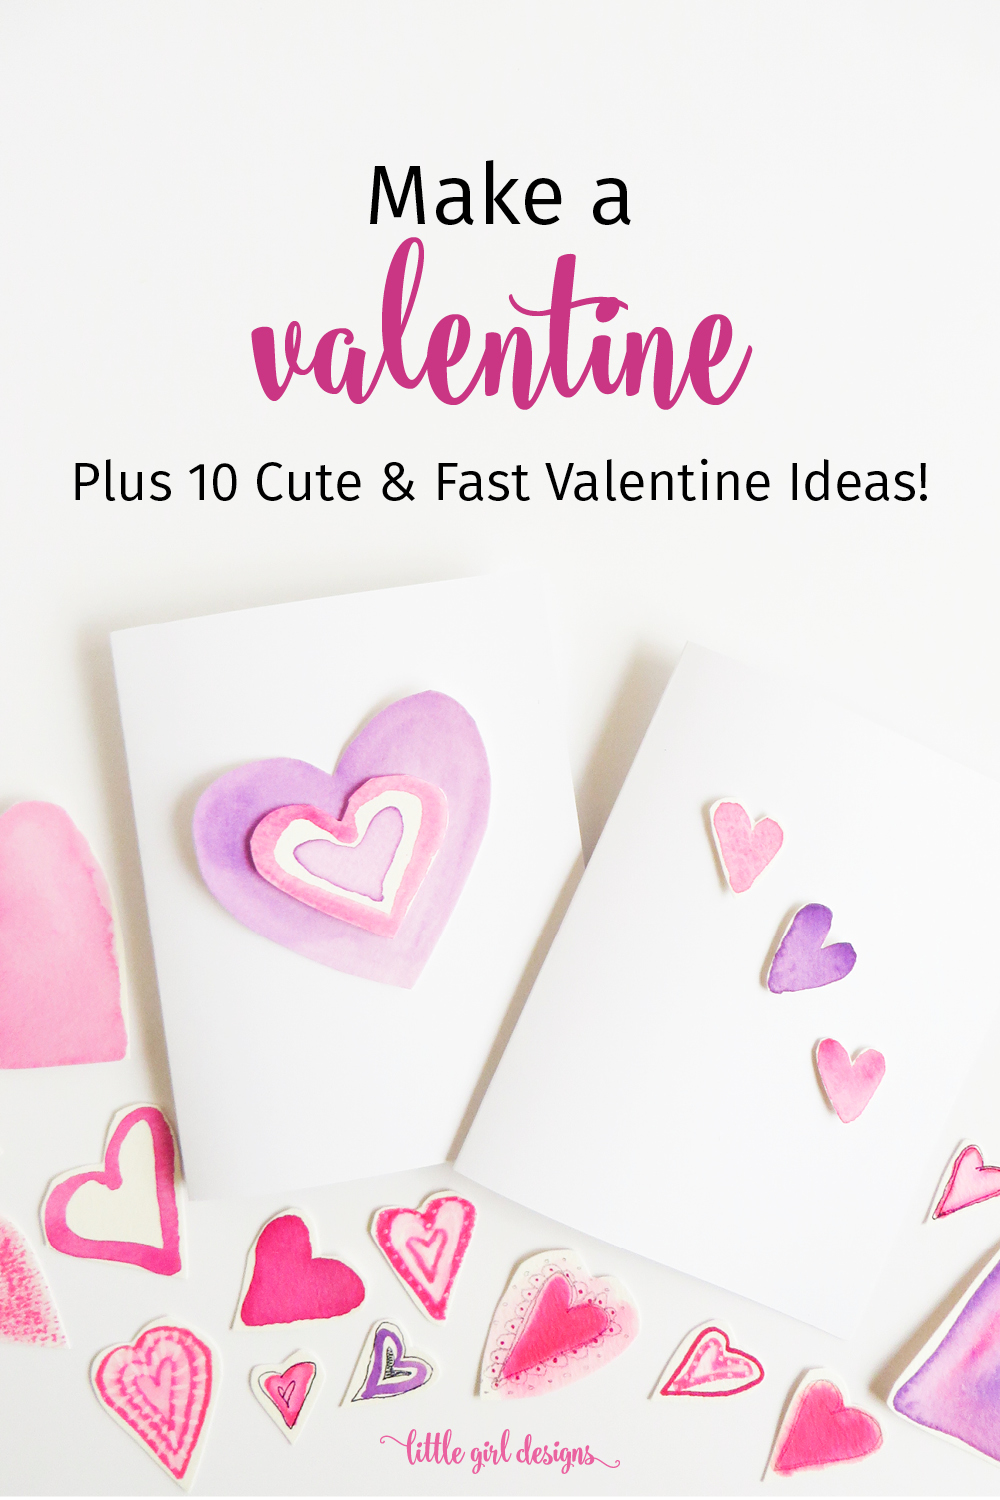 Here's a quick Valentine tutorial plus 10 more cute Valentine card ideas that you can whip up in minutes!